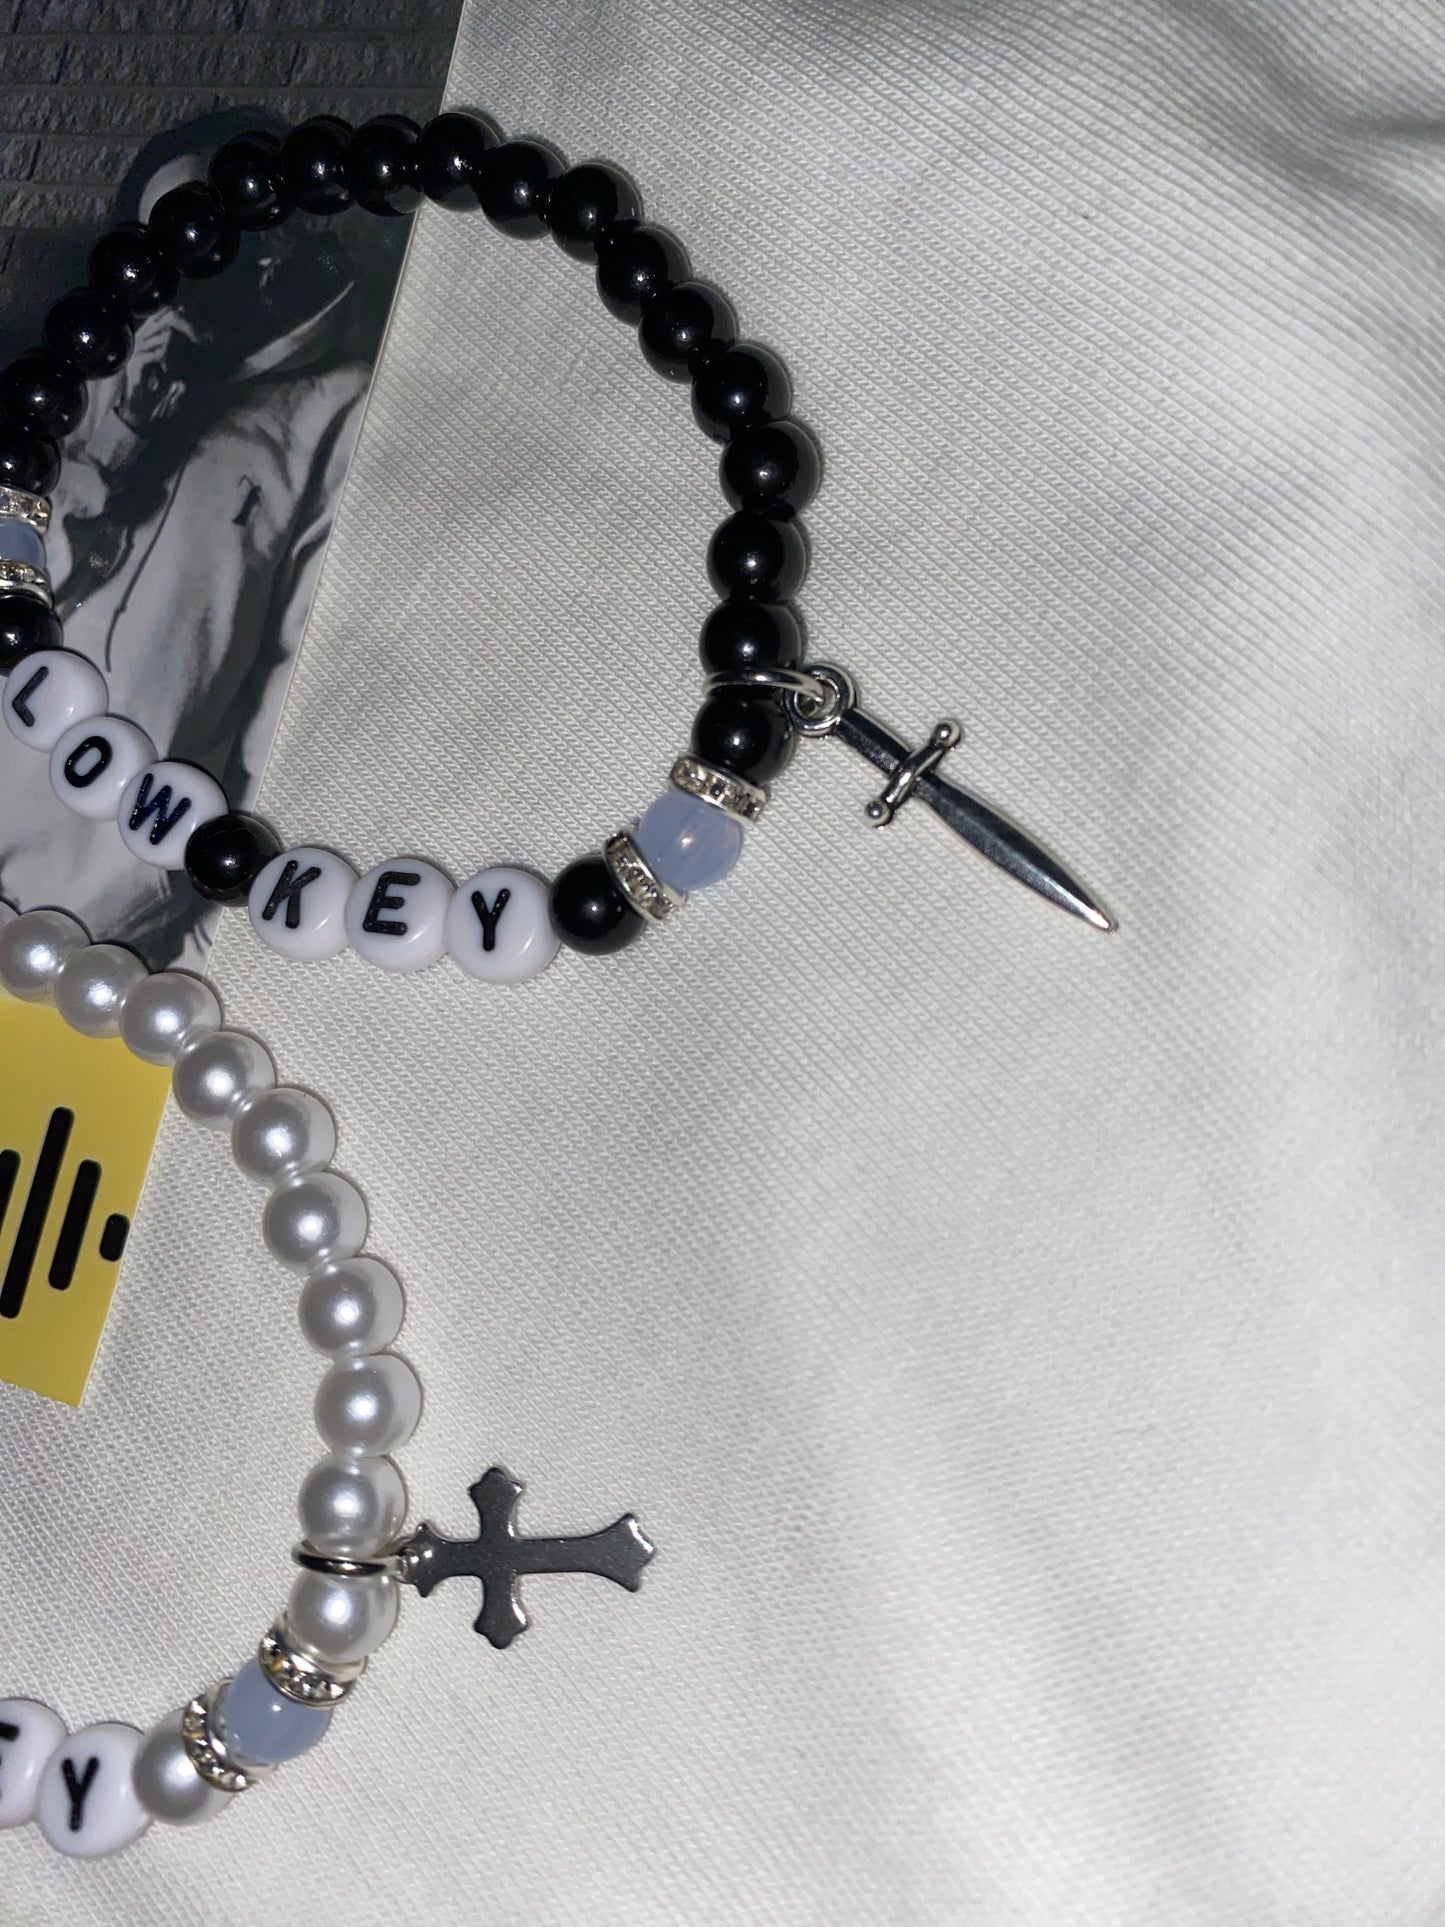 Low Key by Suicideboys matching bracelets